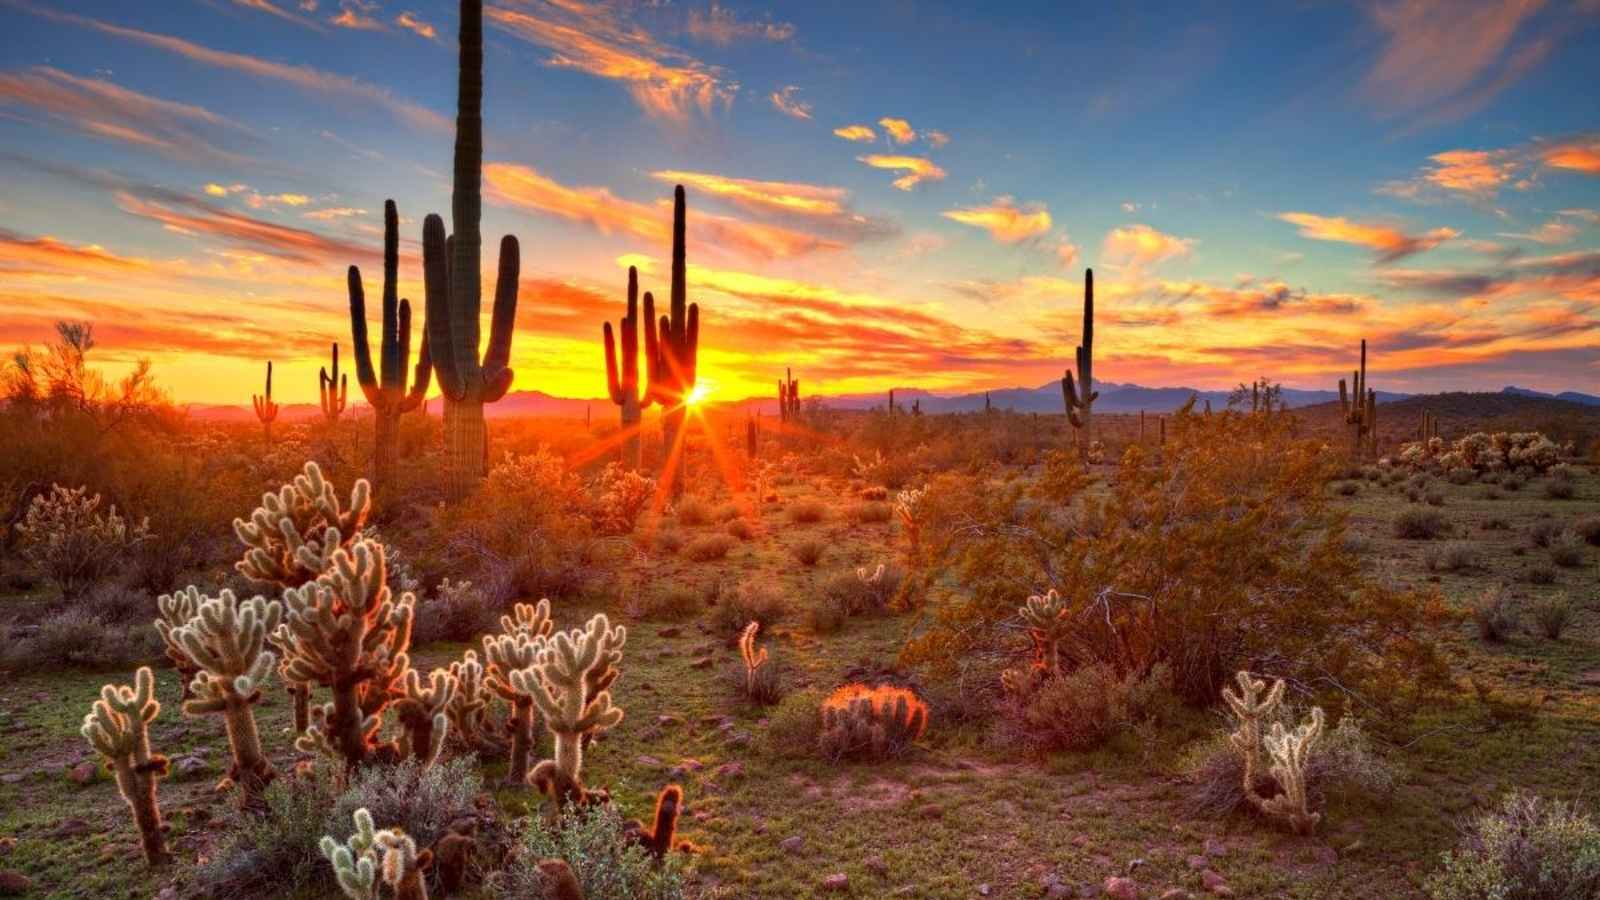 National Arizona Day 2023: Date, History, Facts, Activities